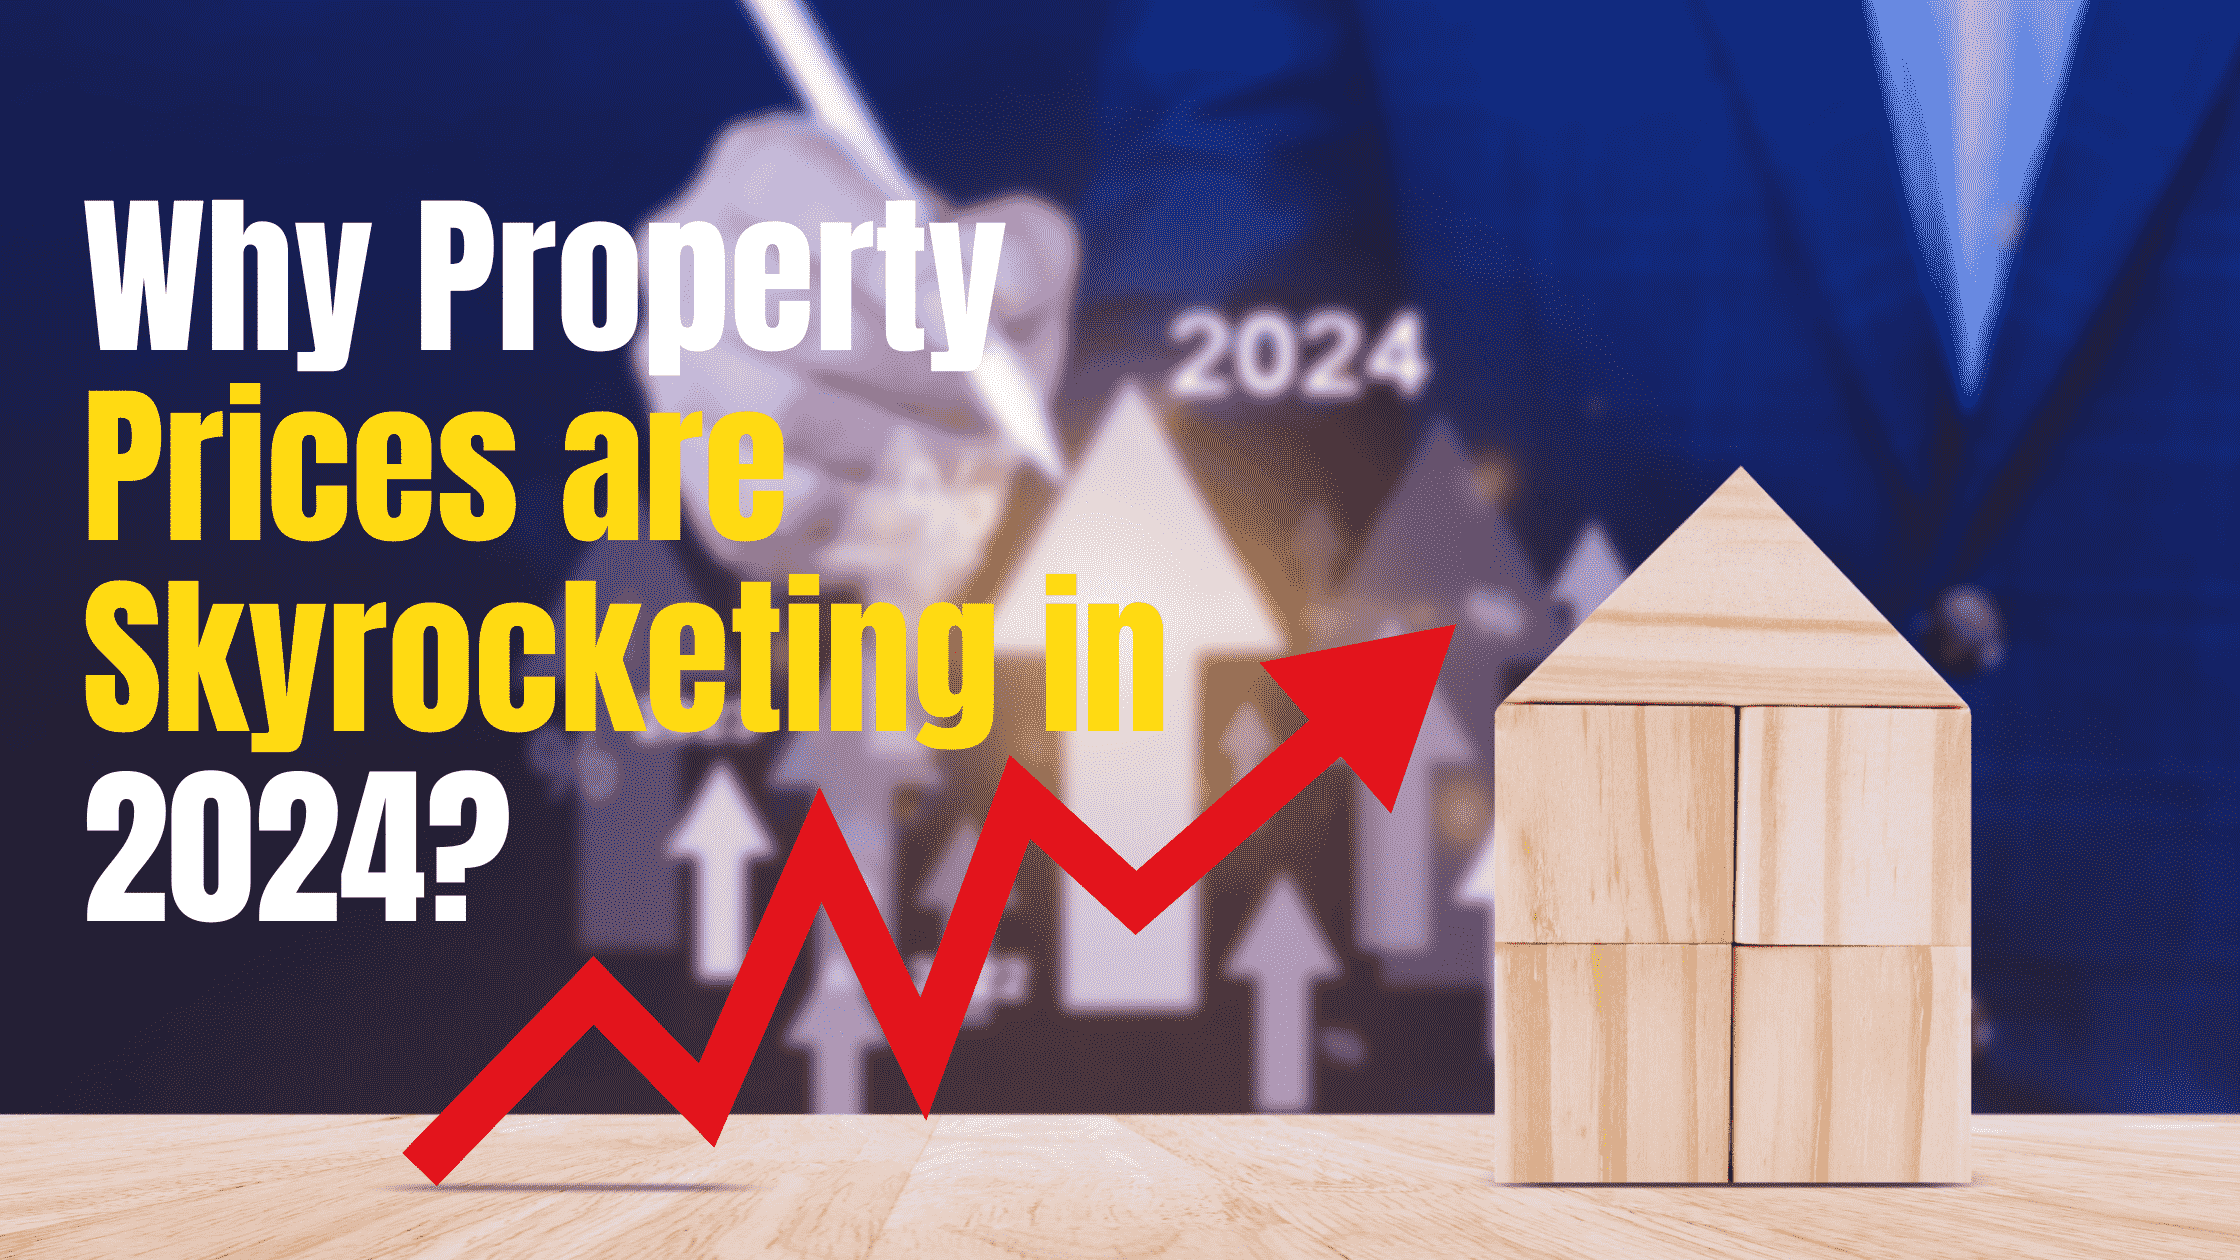 Market on Fire: Why Property Prices are Skyrocketing in 2024? What You Should Do!